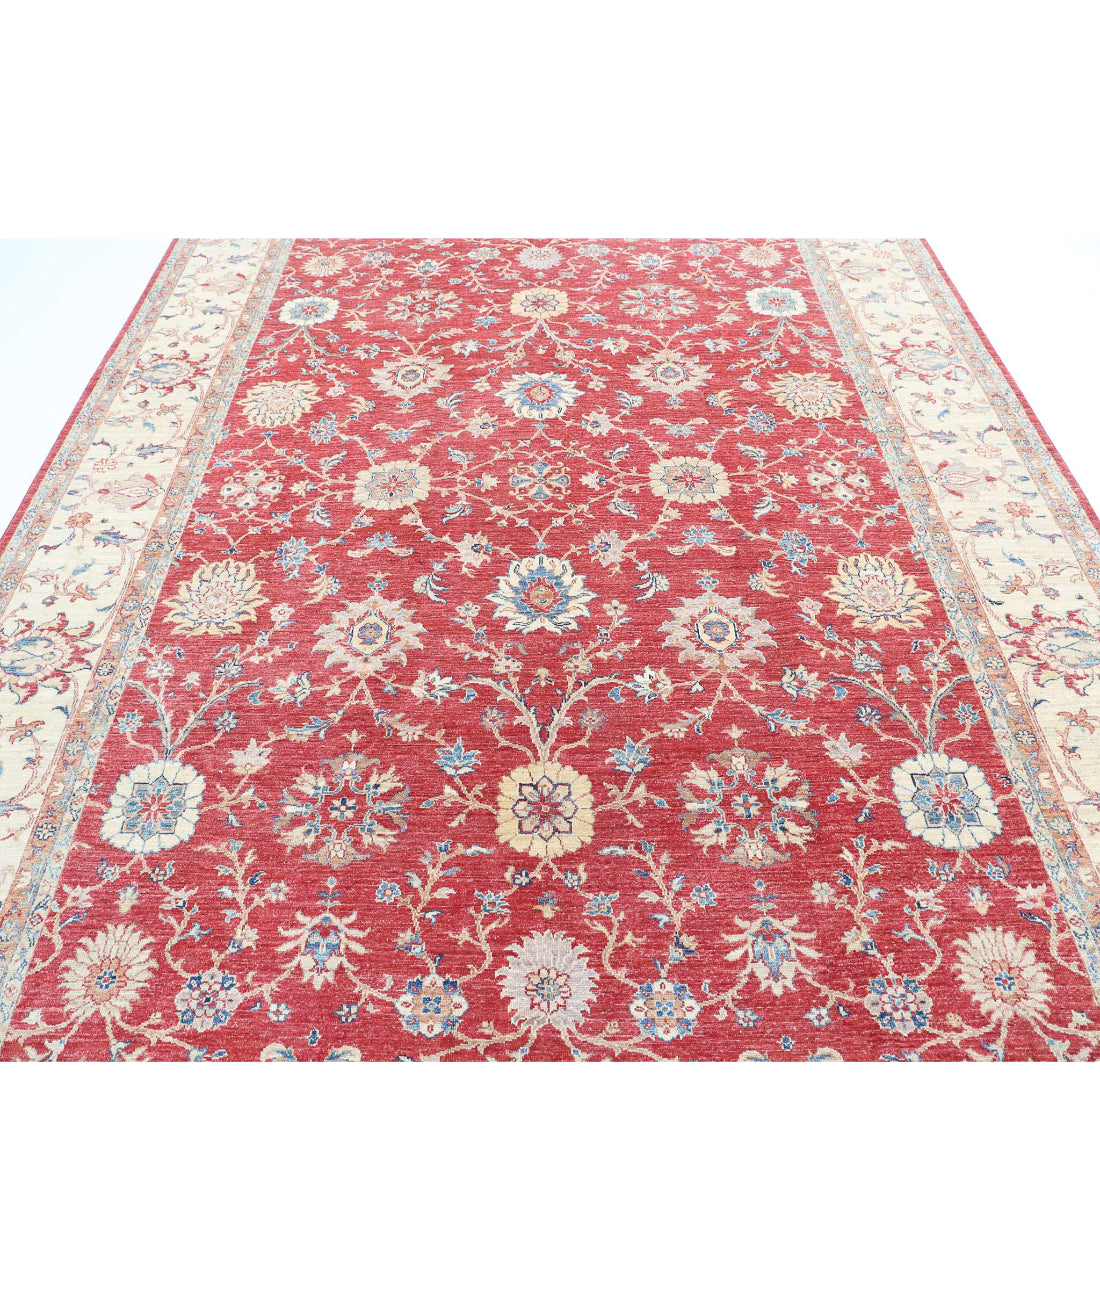 Ziegler 8'3'' X 11'7'' Hand-Knotted Wool Rug 8'3'' x 11'7'' (248 X 348) / Red / Ivory